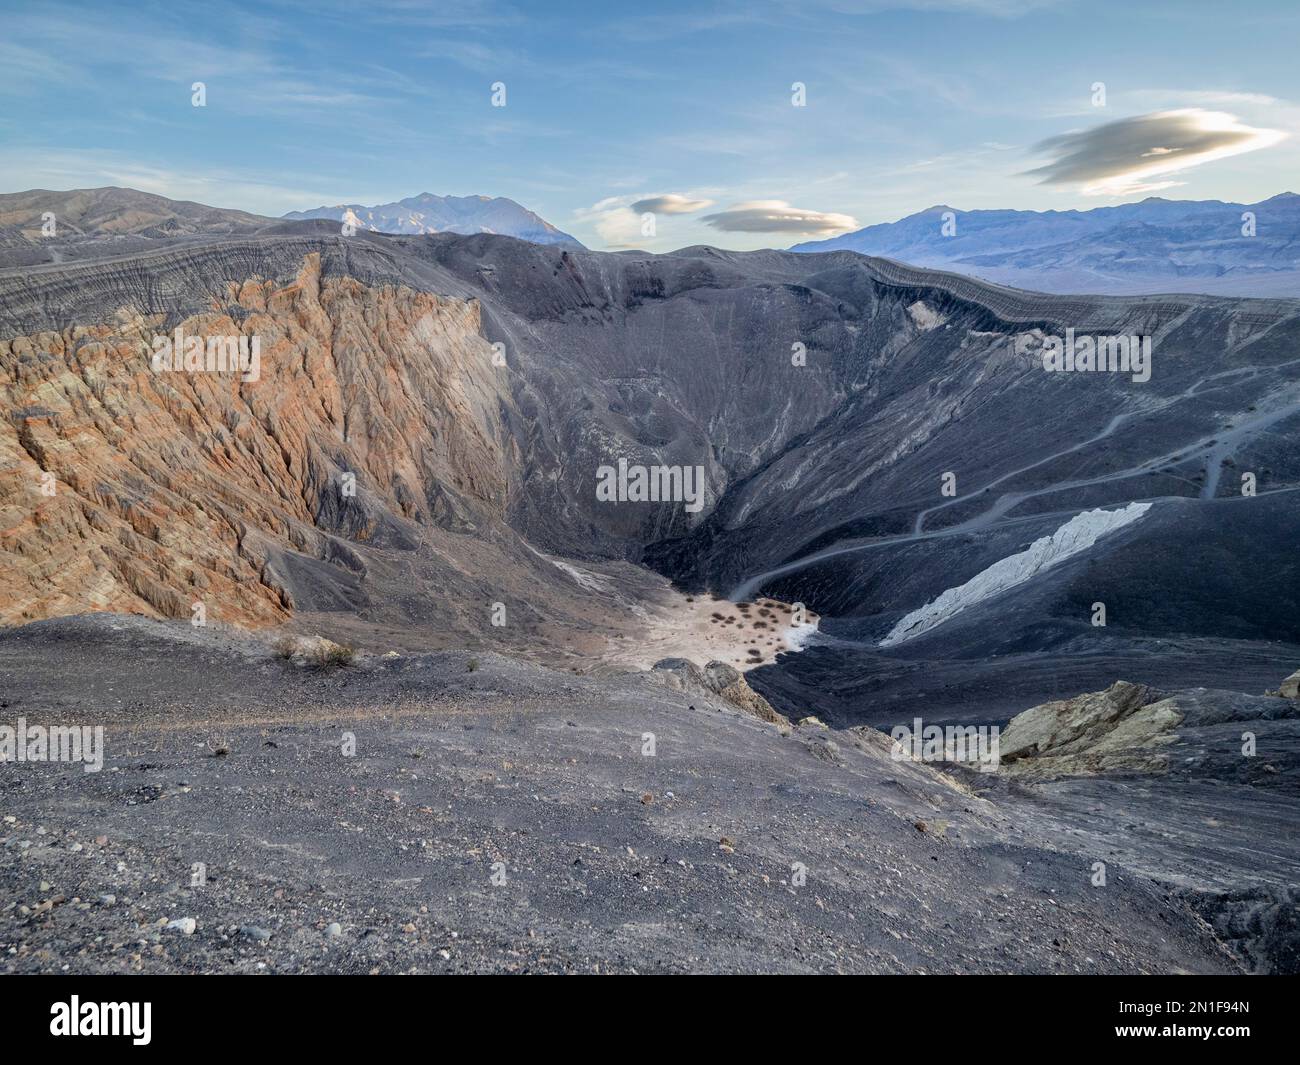 Ubehebe Crater, a volcanic crater half a mile across and 600 feet deep, Death Valley National Park, California, United States of America Stock Photo